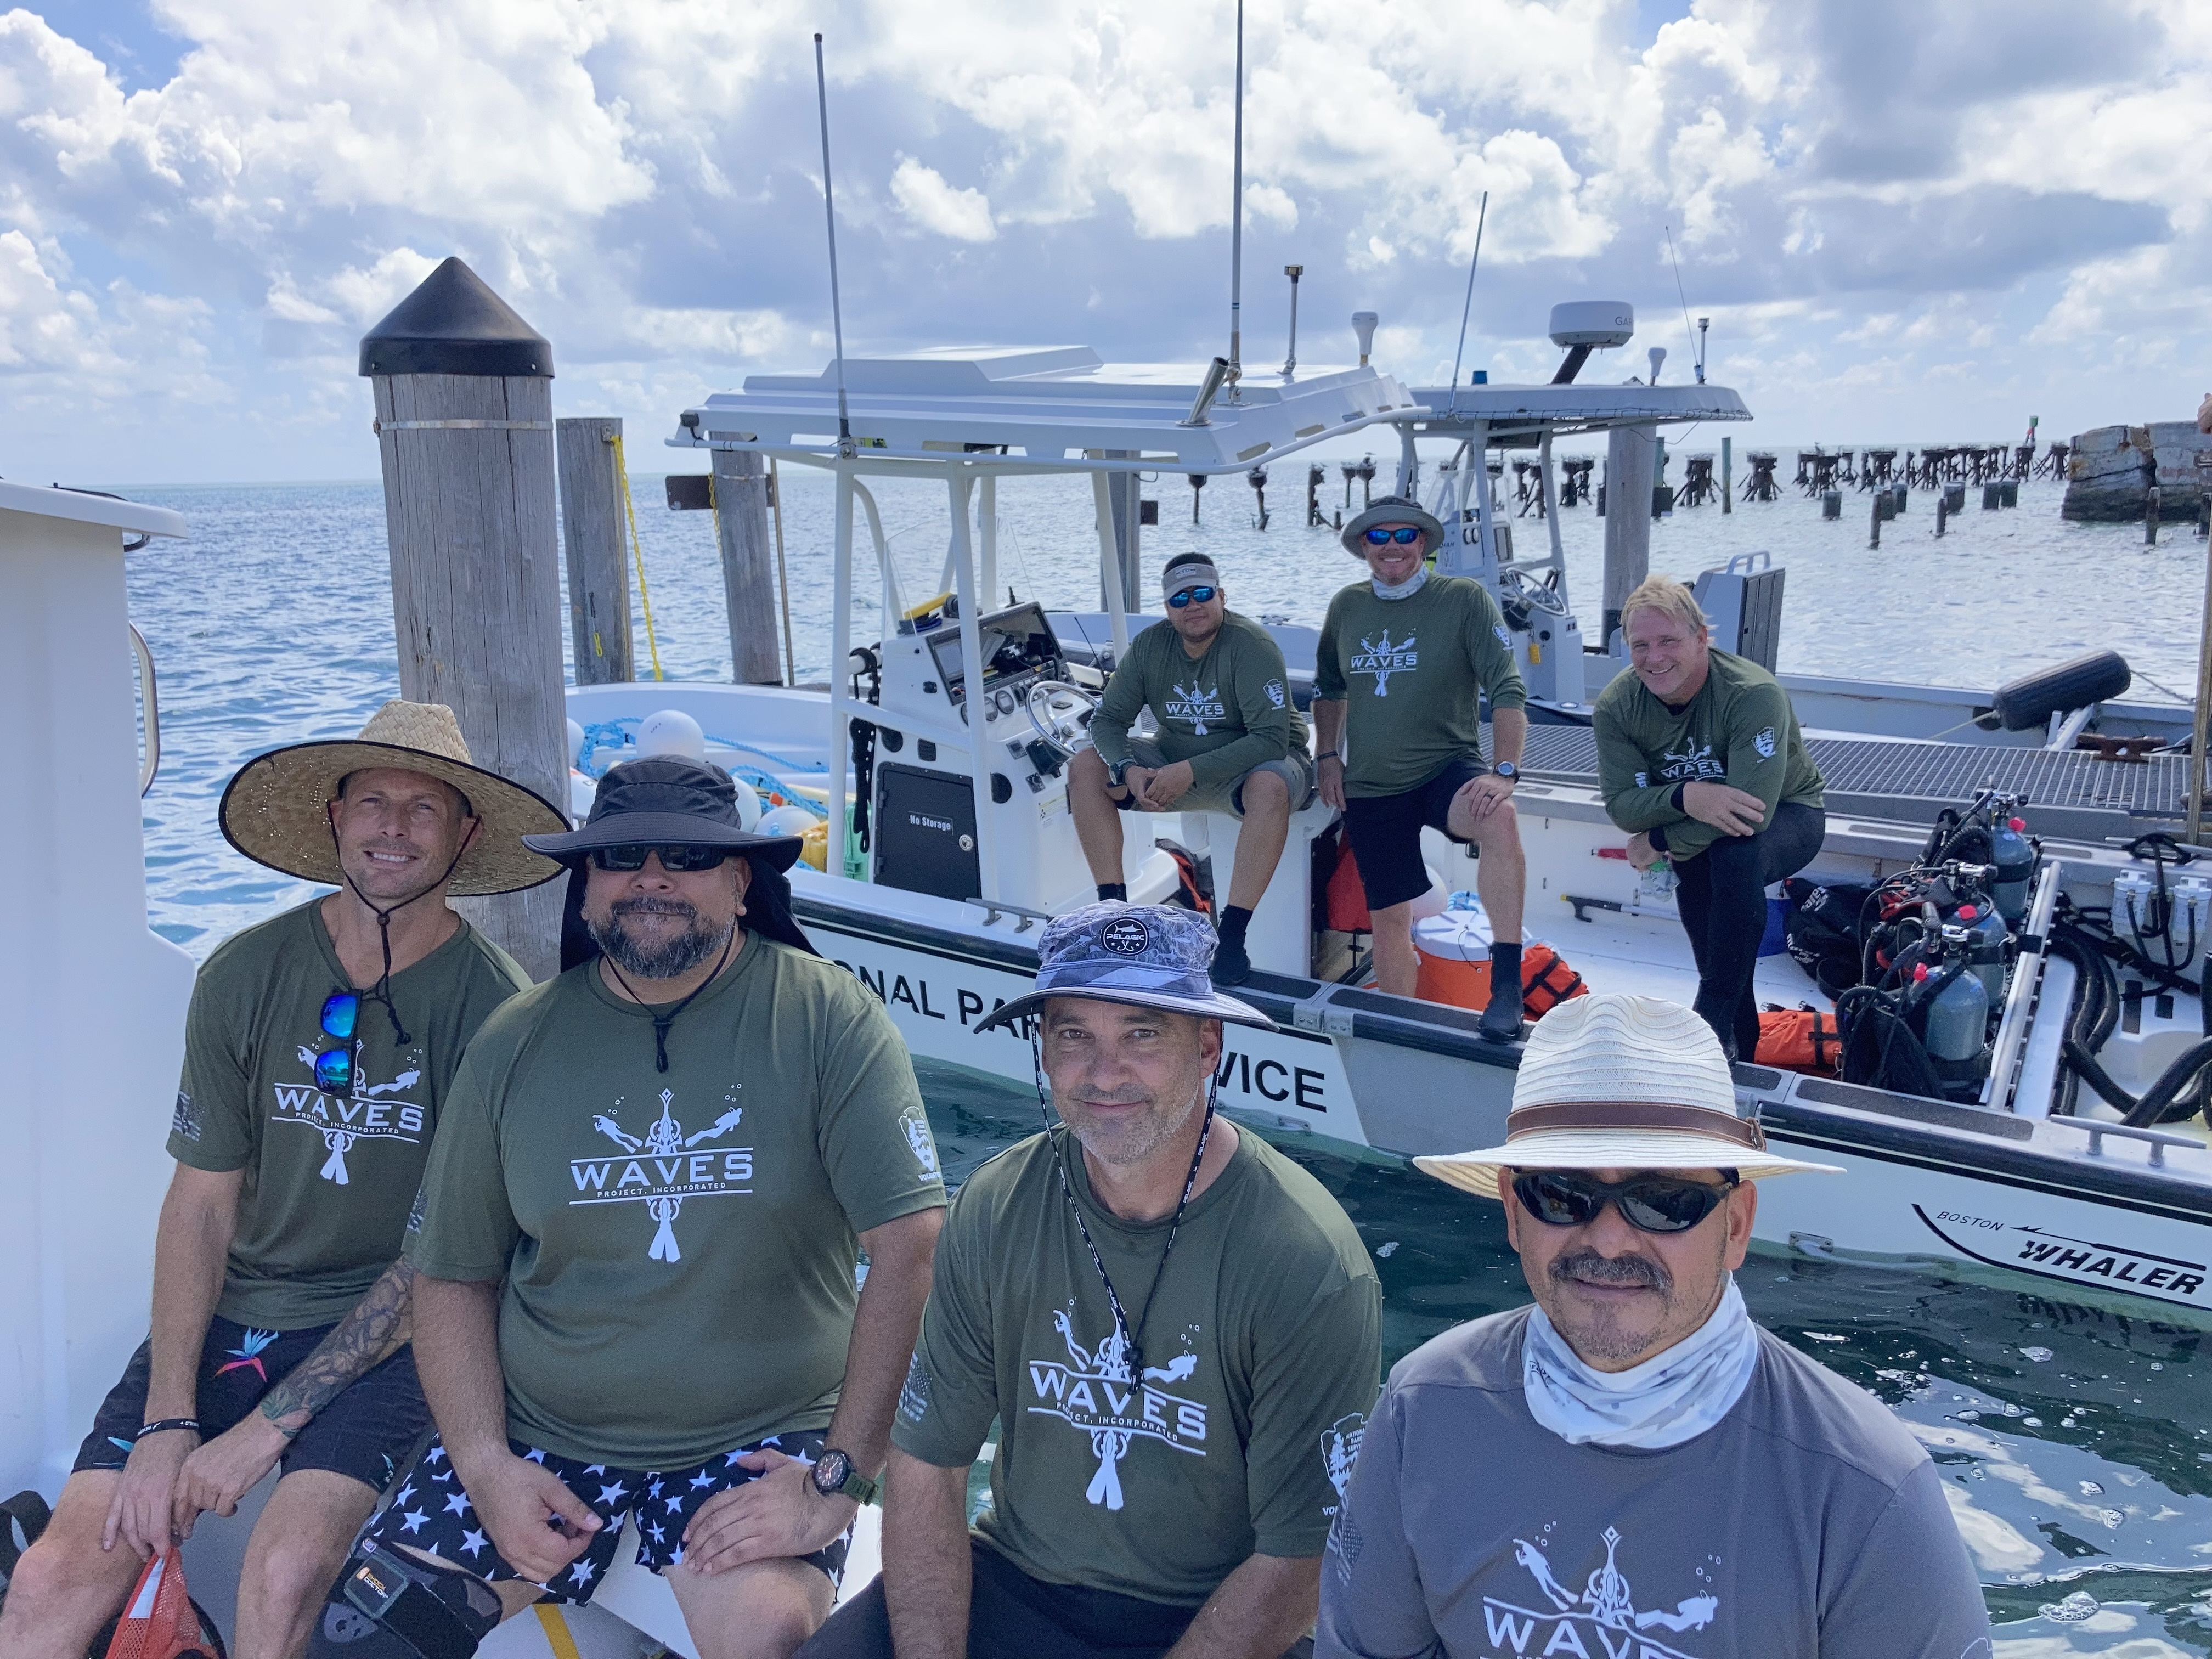 Seven men with "WAVES" t-shirts pose on boats